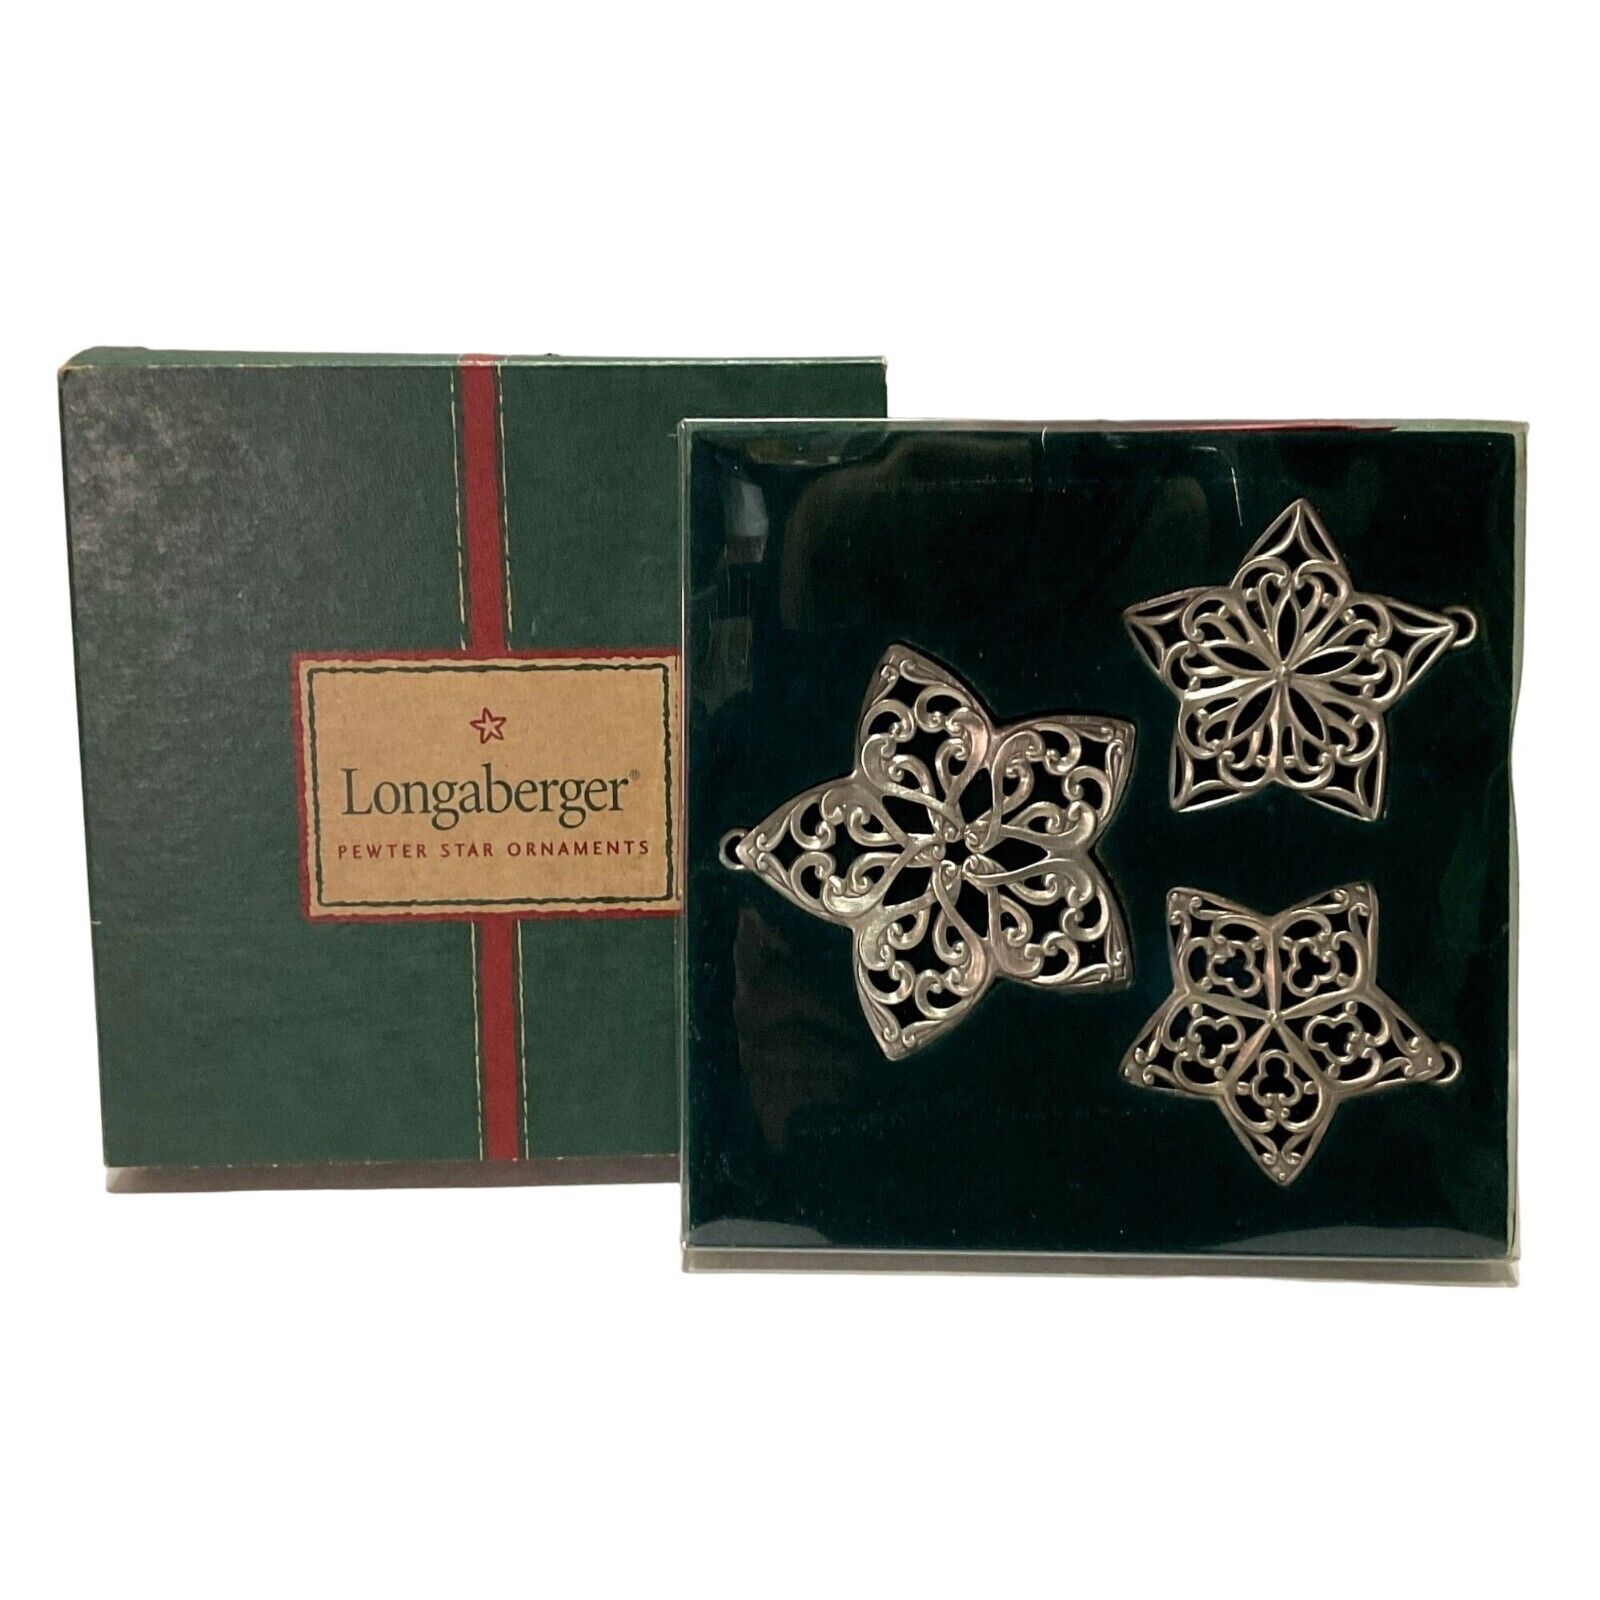 LONGABERGER PEWTER STARS ORNAMENTS IN BOX 2001 IN BOX 3 SIZES No 77623